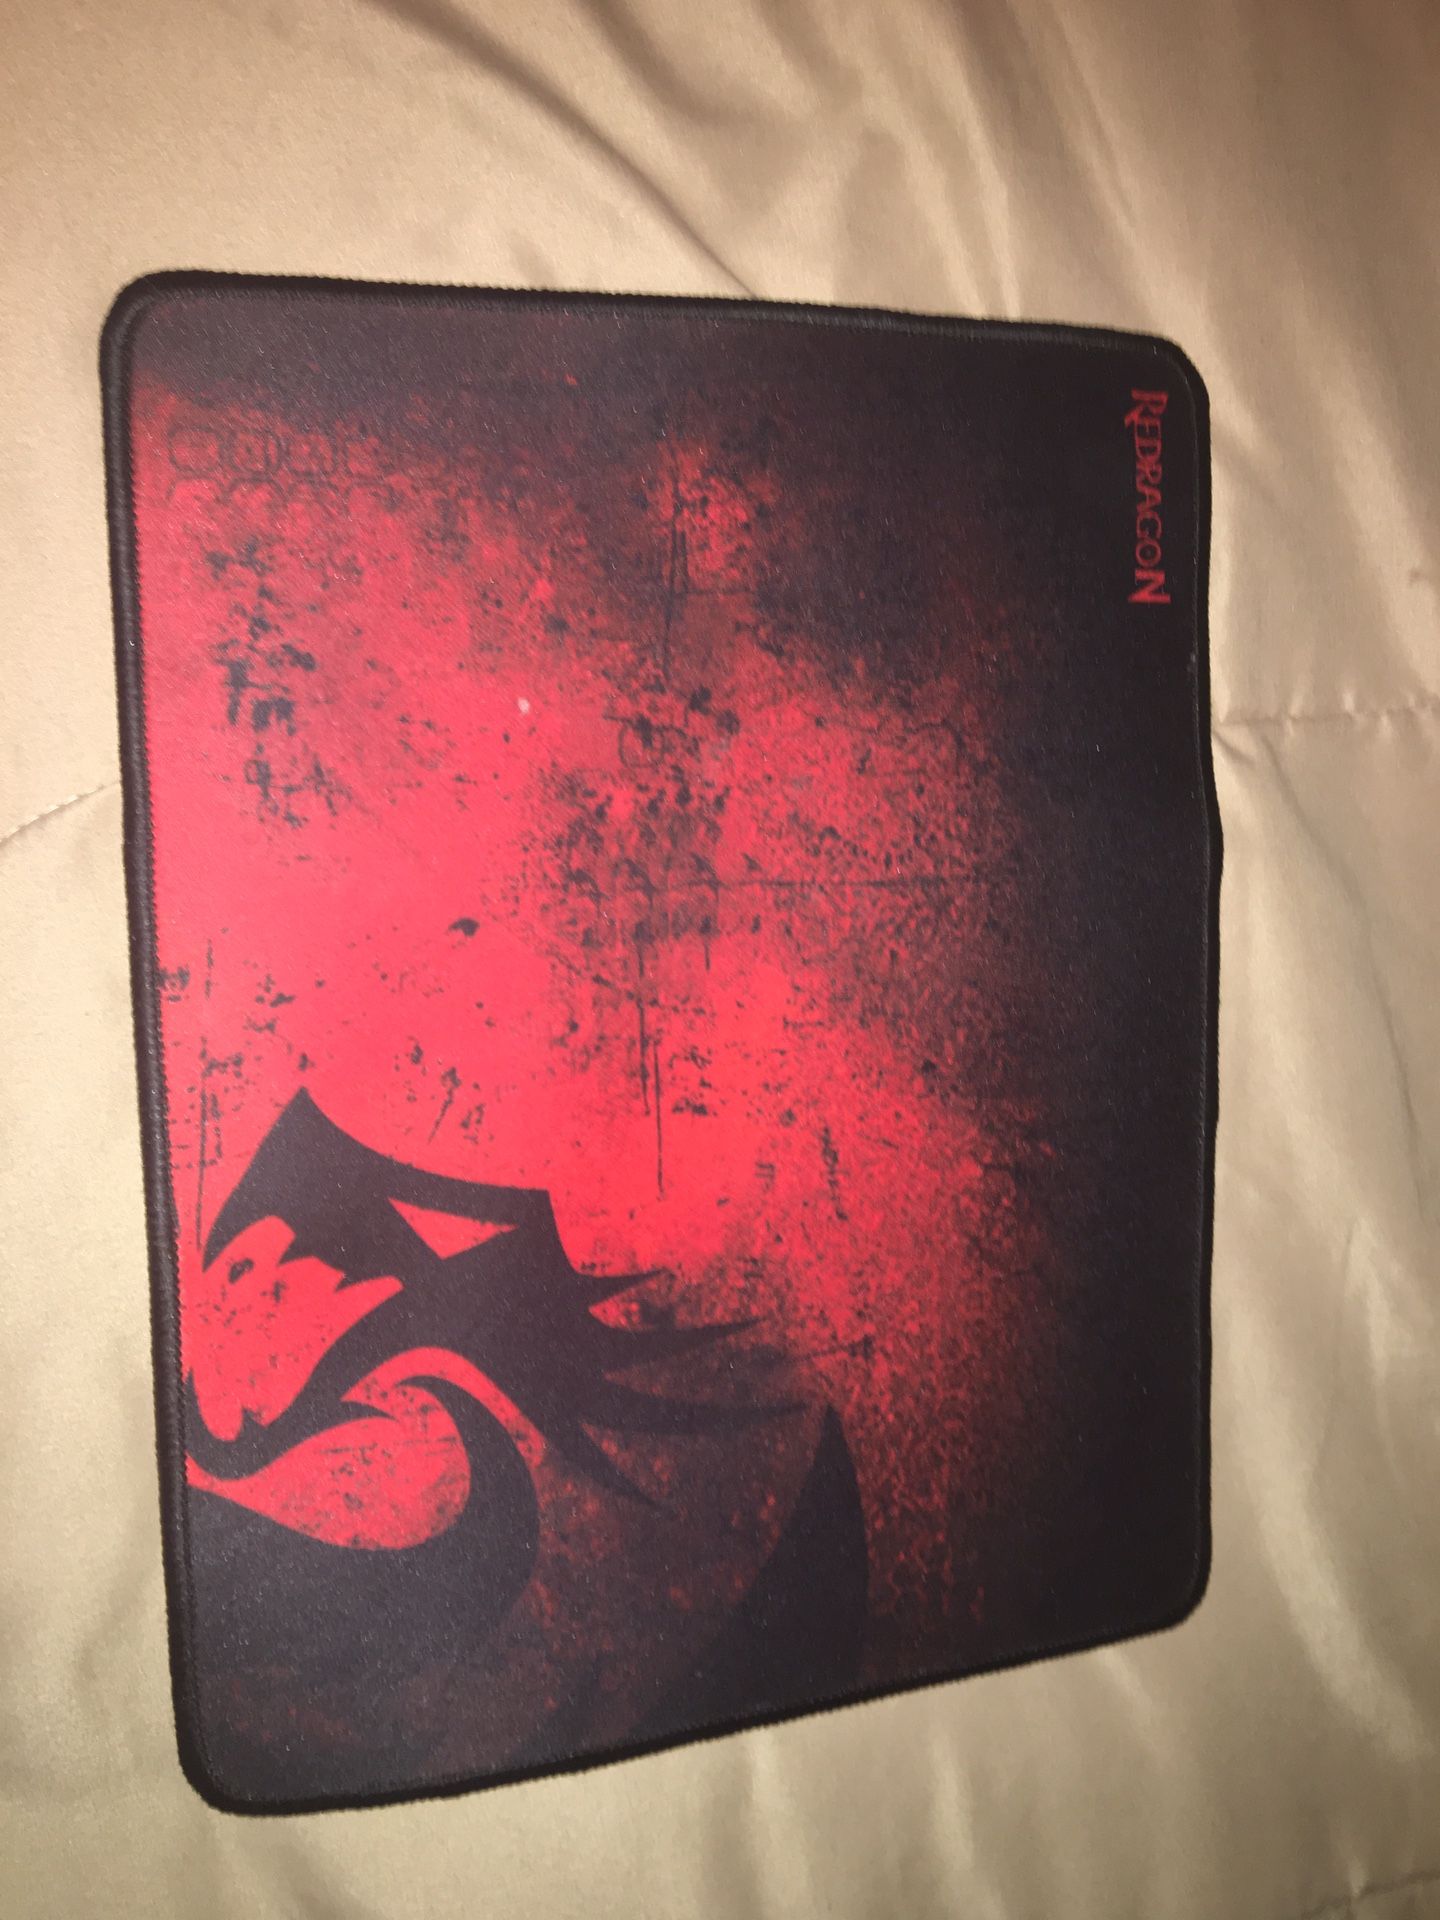 Redragon mouse pad